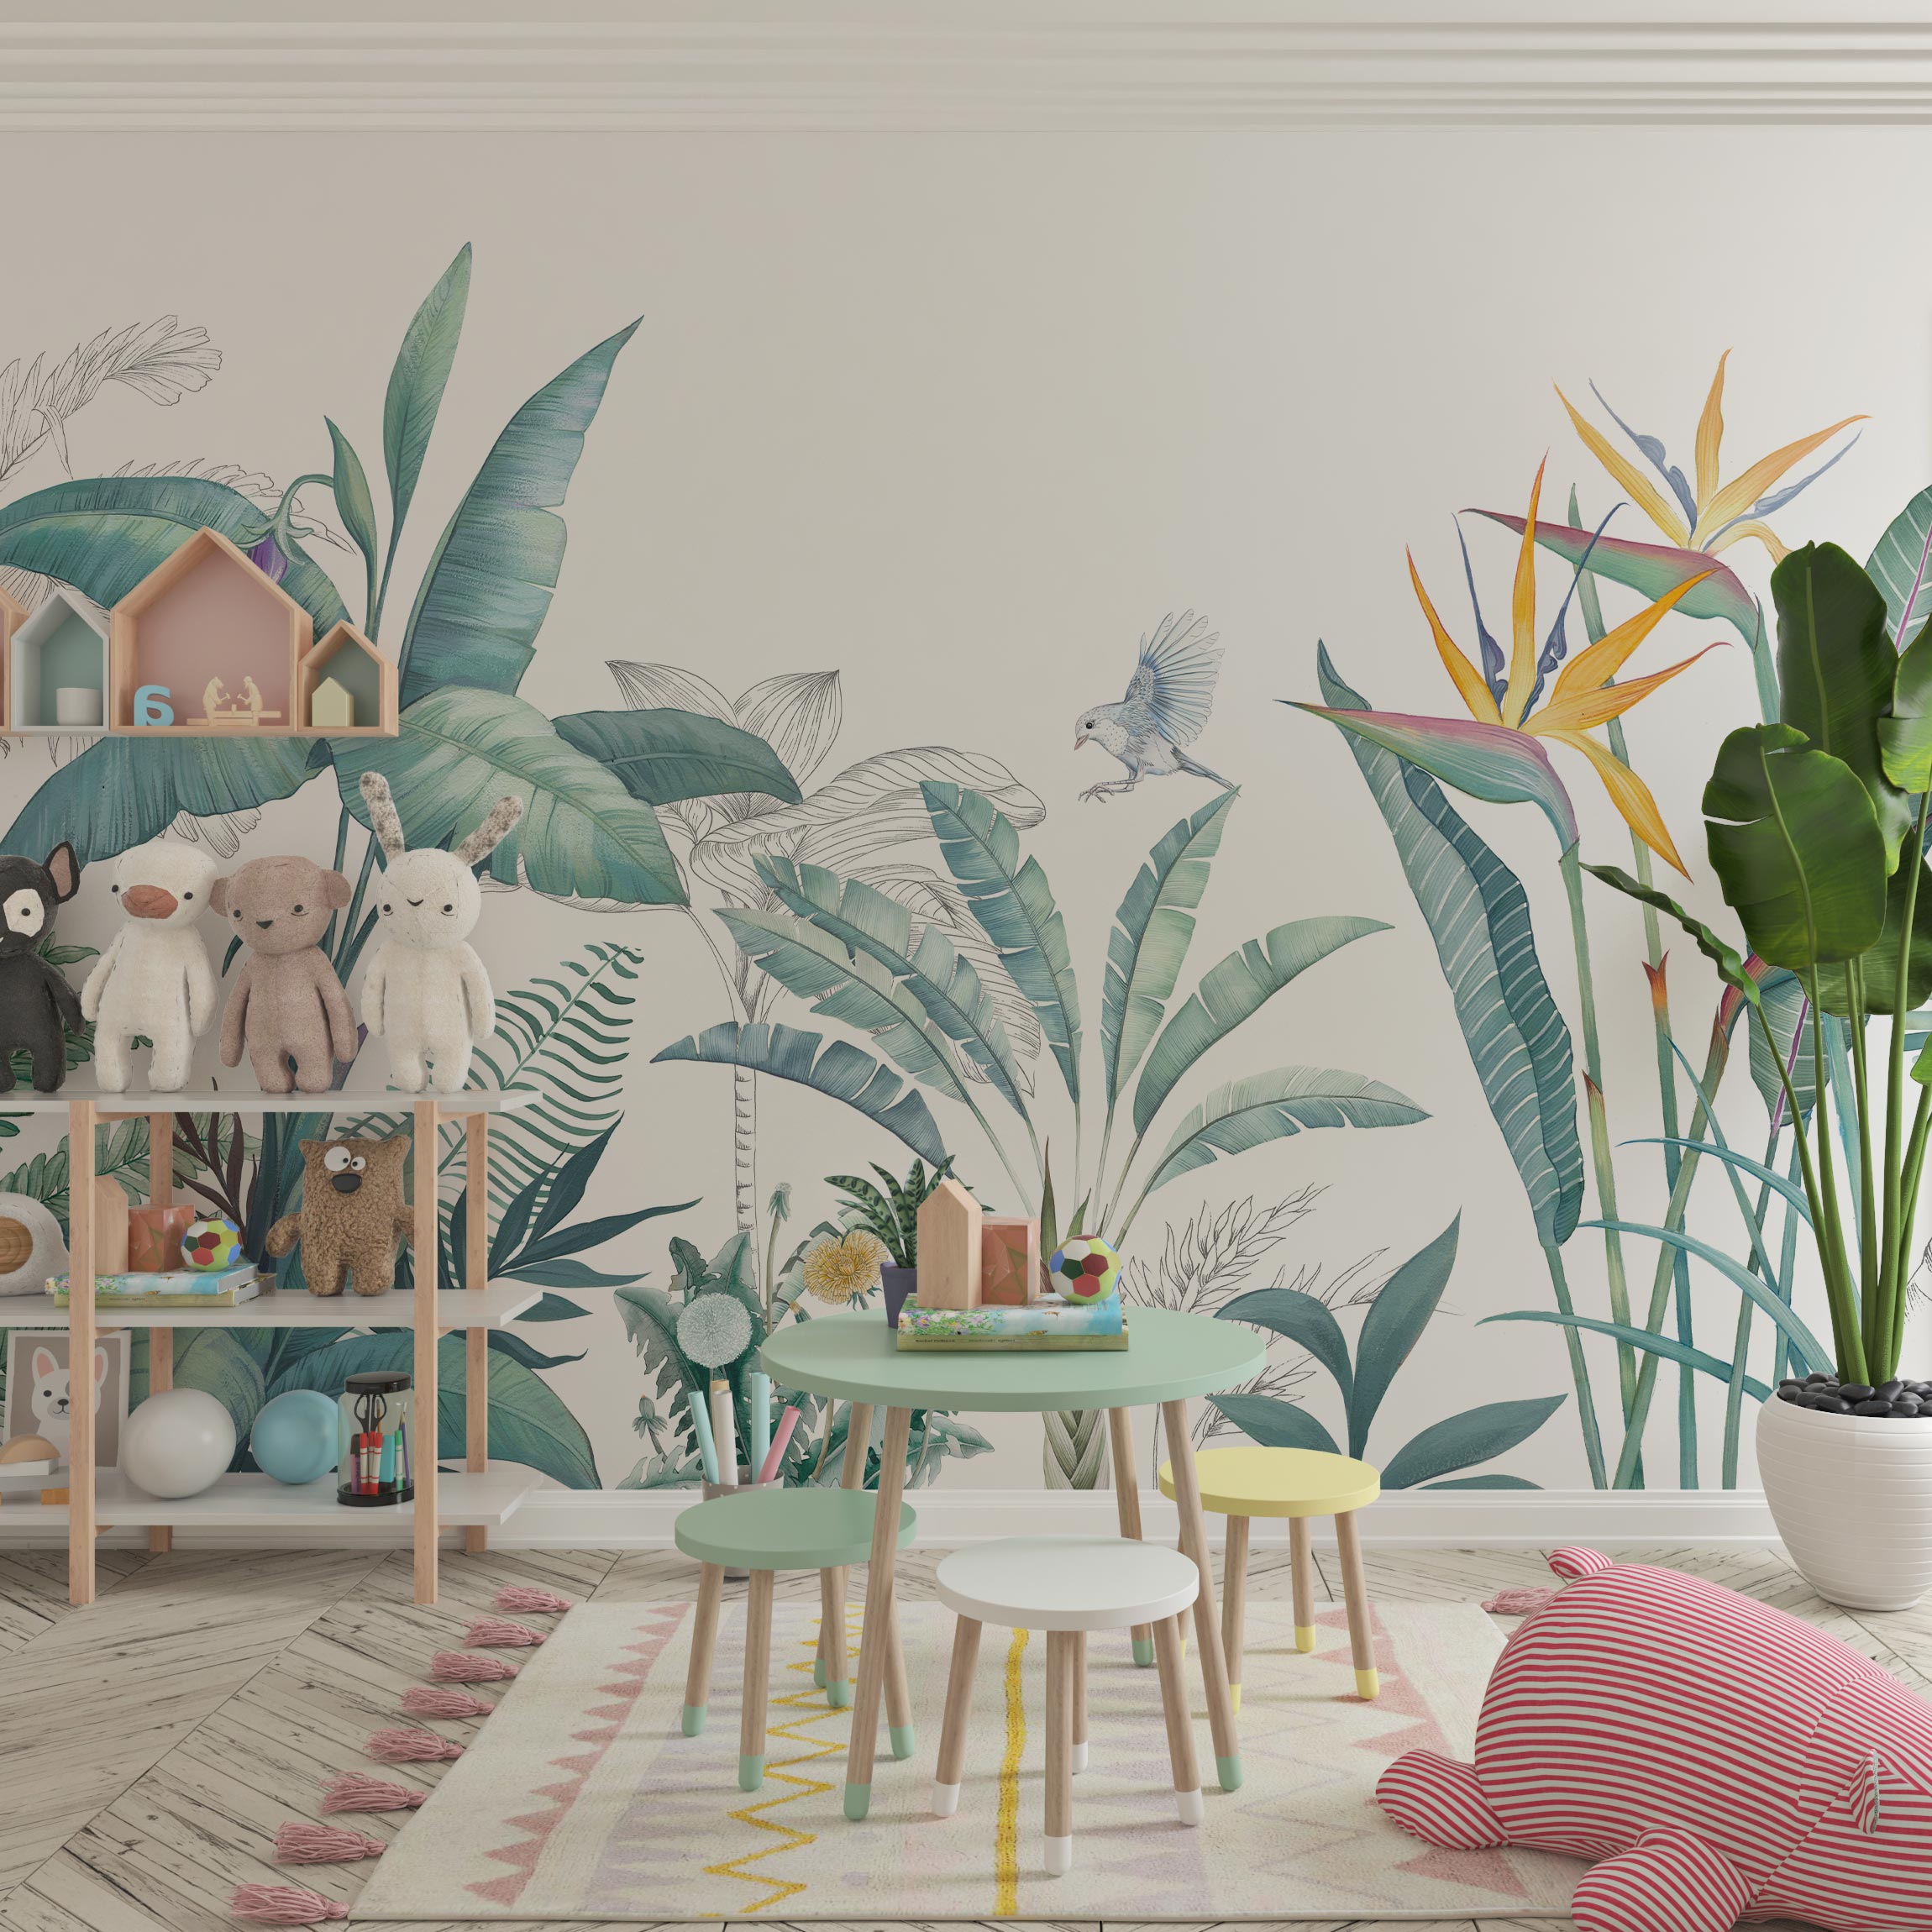 files/Colorfulkids_roomwithpastelcolorfurnitureandaccentwallwithvintagebotanicalwallpaperthatcomplimentsthecolorsoftheinterior_7d26cf98-8d7a-44a6-b981-db3030797724.jpg